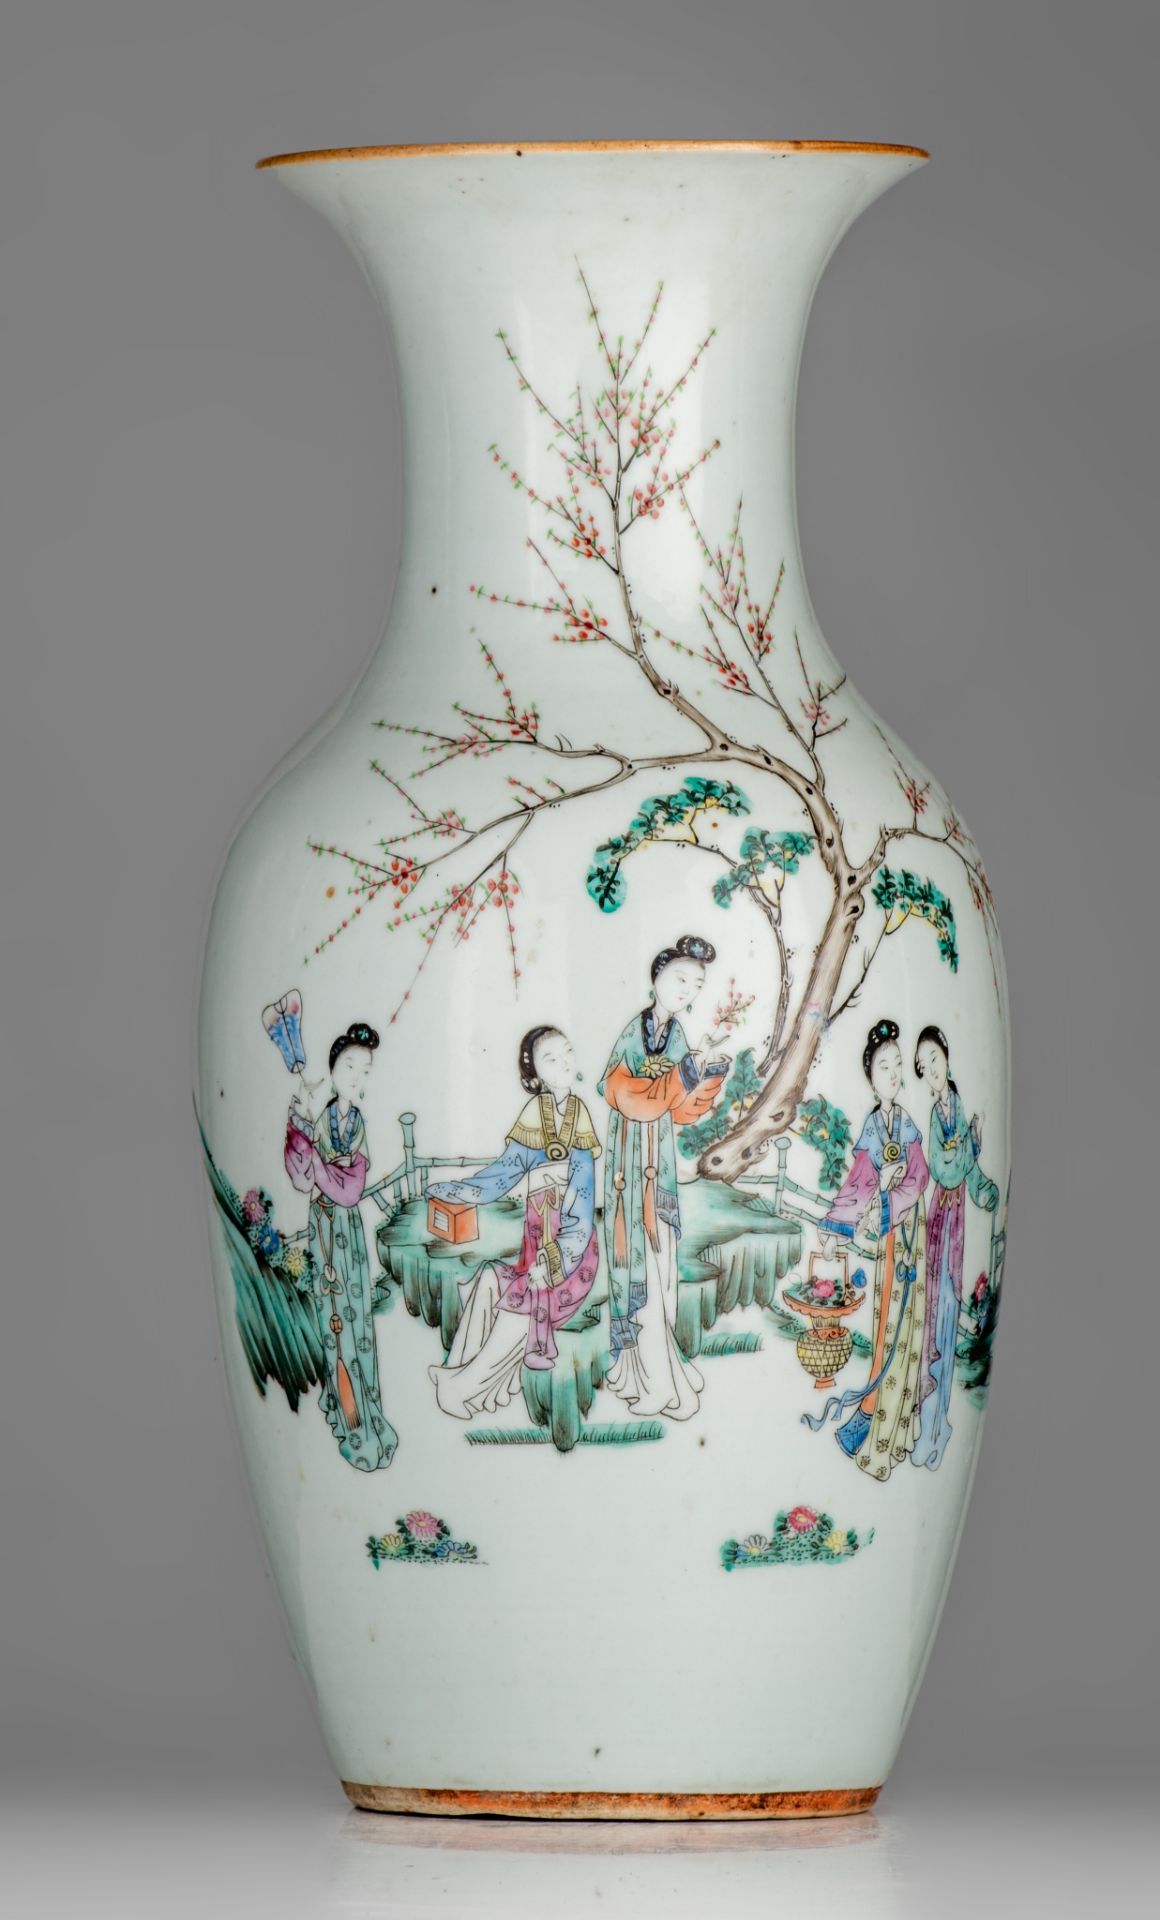 Four Chinese famille rose vases, some with a signed text, 19thC and Republic period, H 42,5 - 43,5 c - Bild 2 aus 20